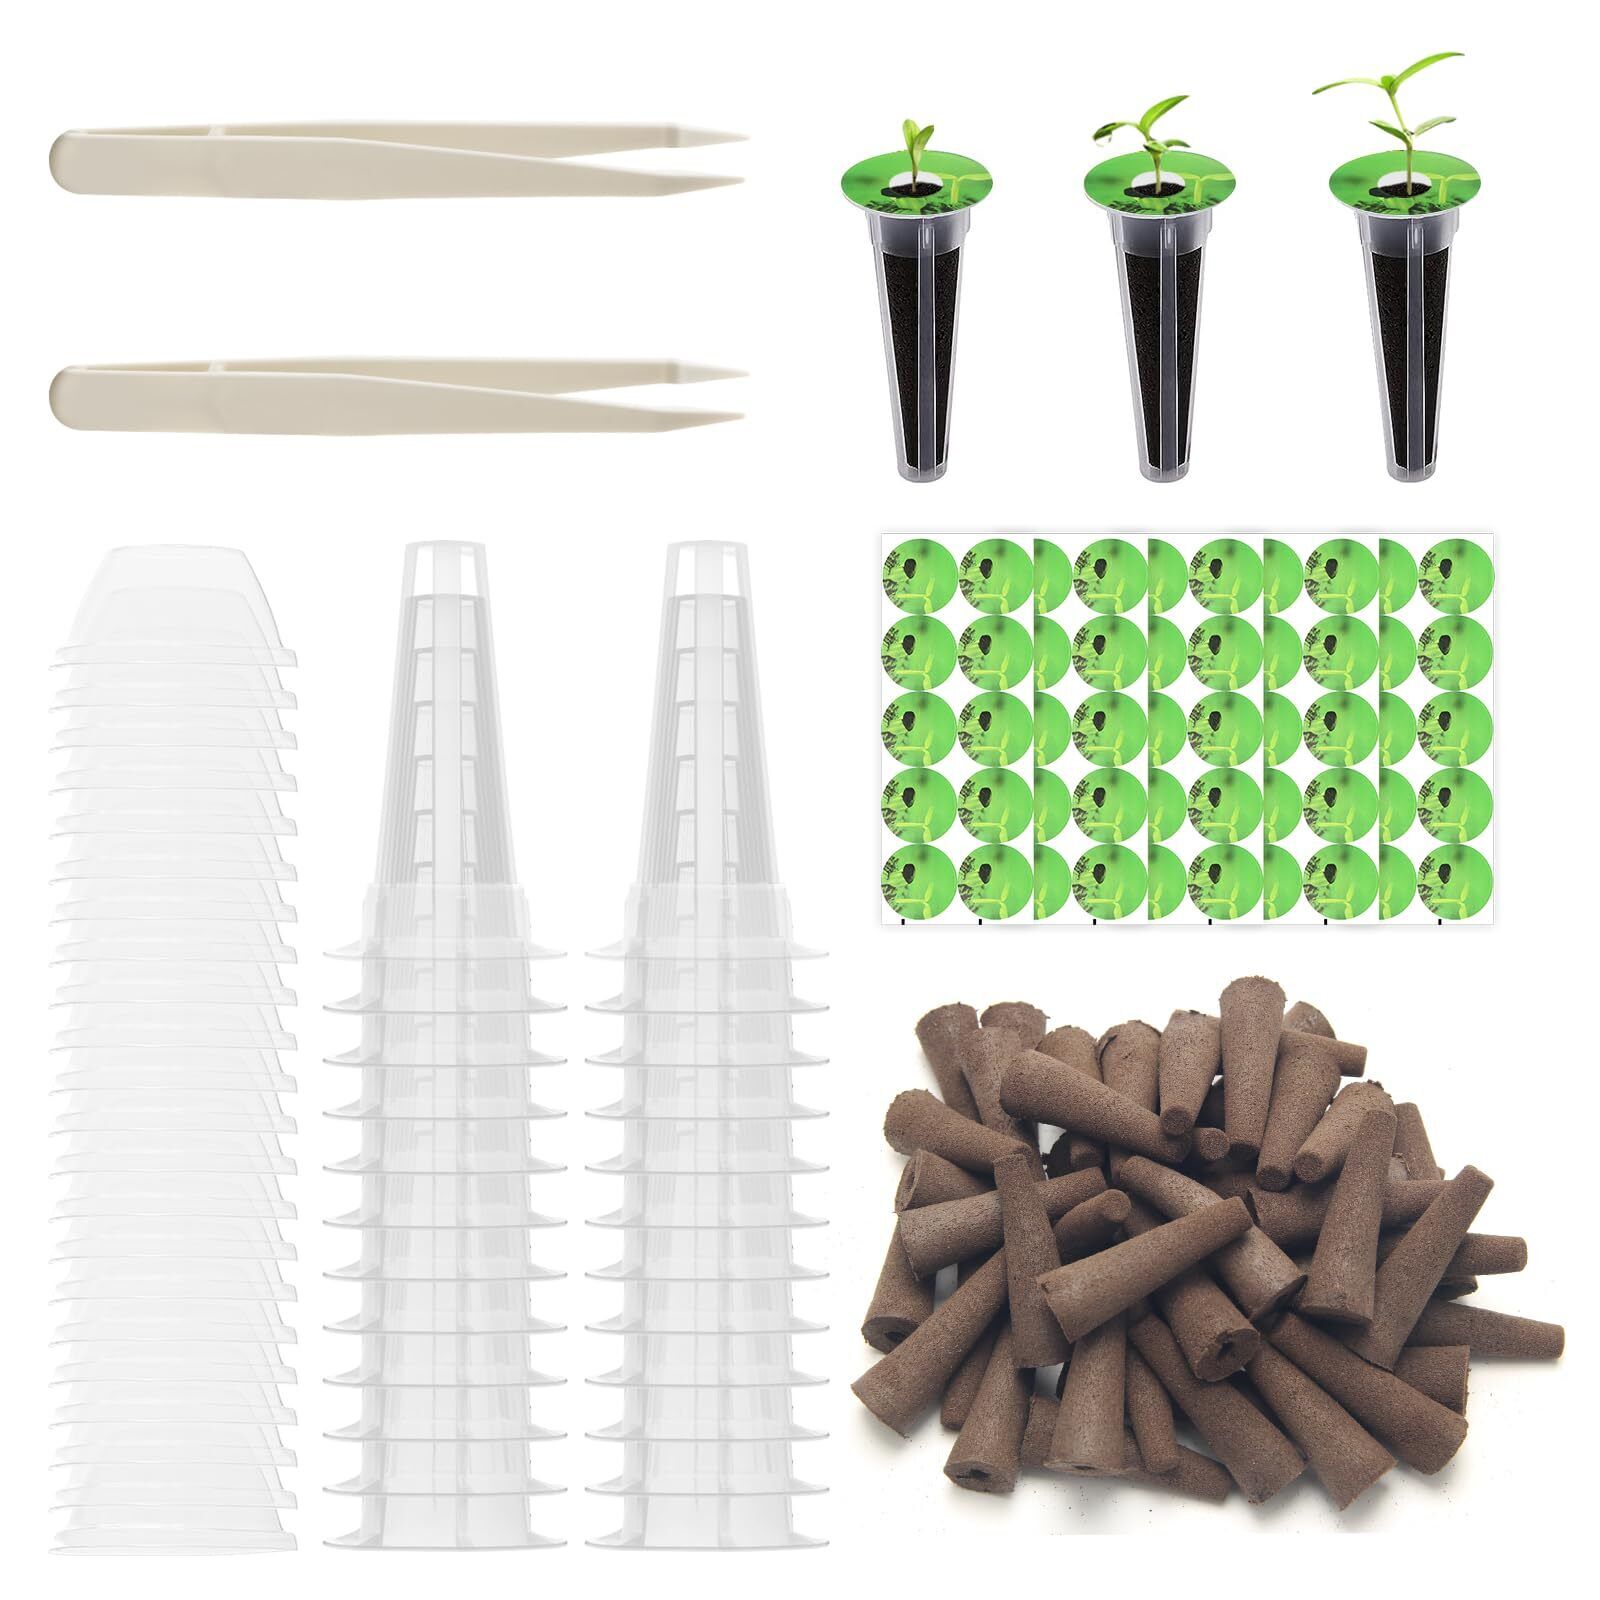 150Pcs Seed Pod Kit for Aerogarden, Hydroponics Garden Accessories for Hydrop...